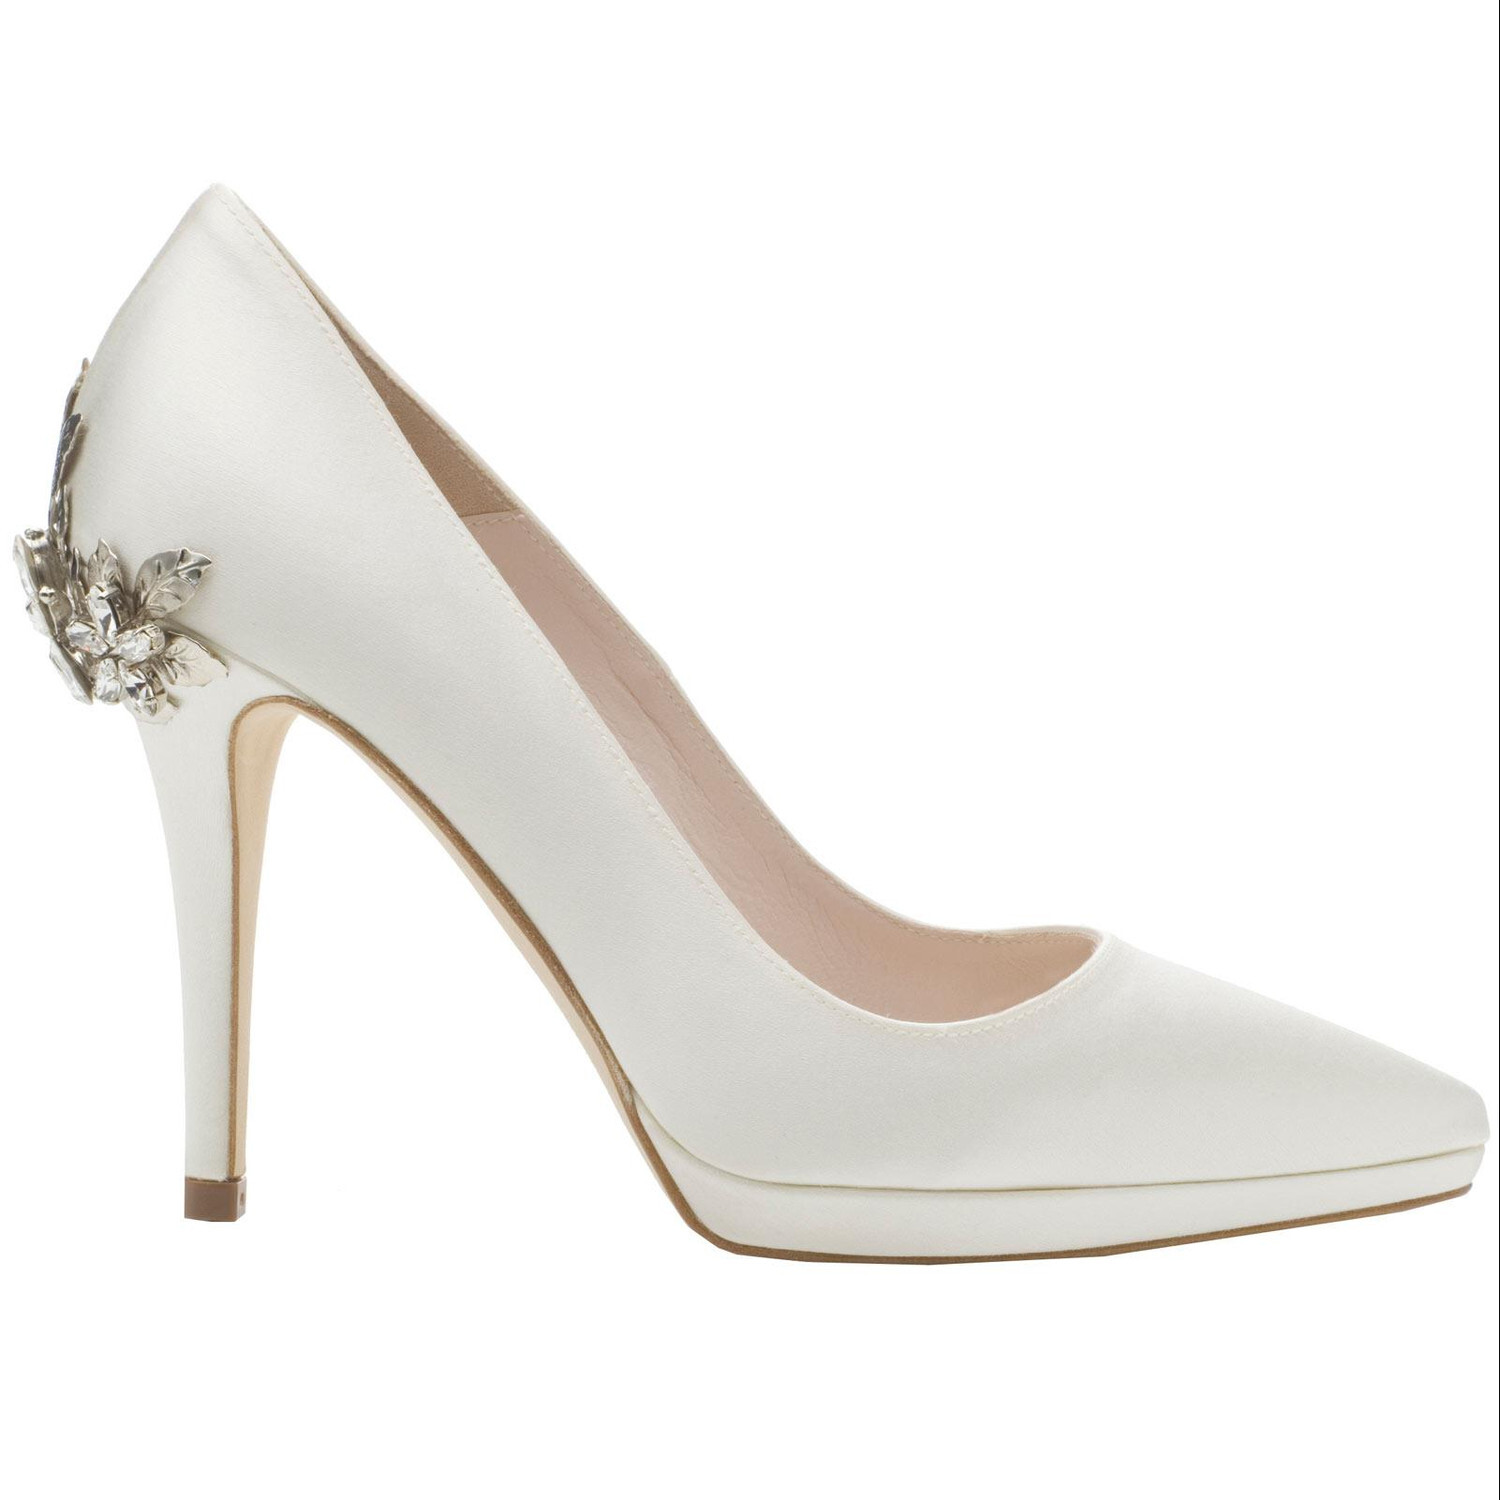 Joanie Daisy Wedding Shoes from Harriet Wilde - hitched.co.uk